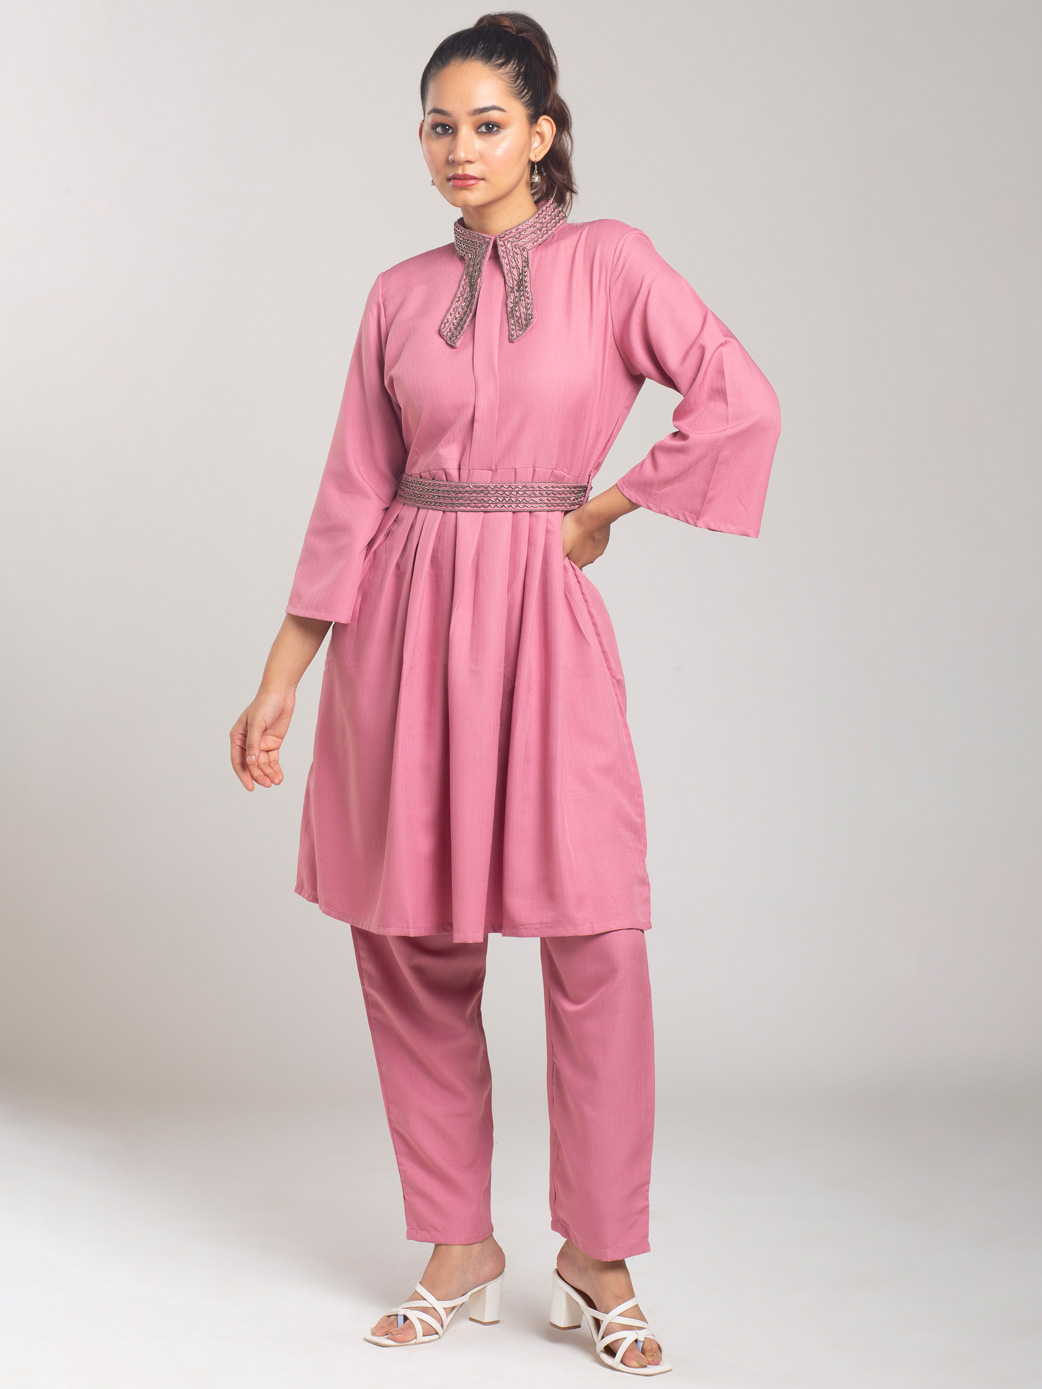 SHERBET PINK EMBROIDERY CO ORD SET